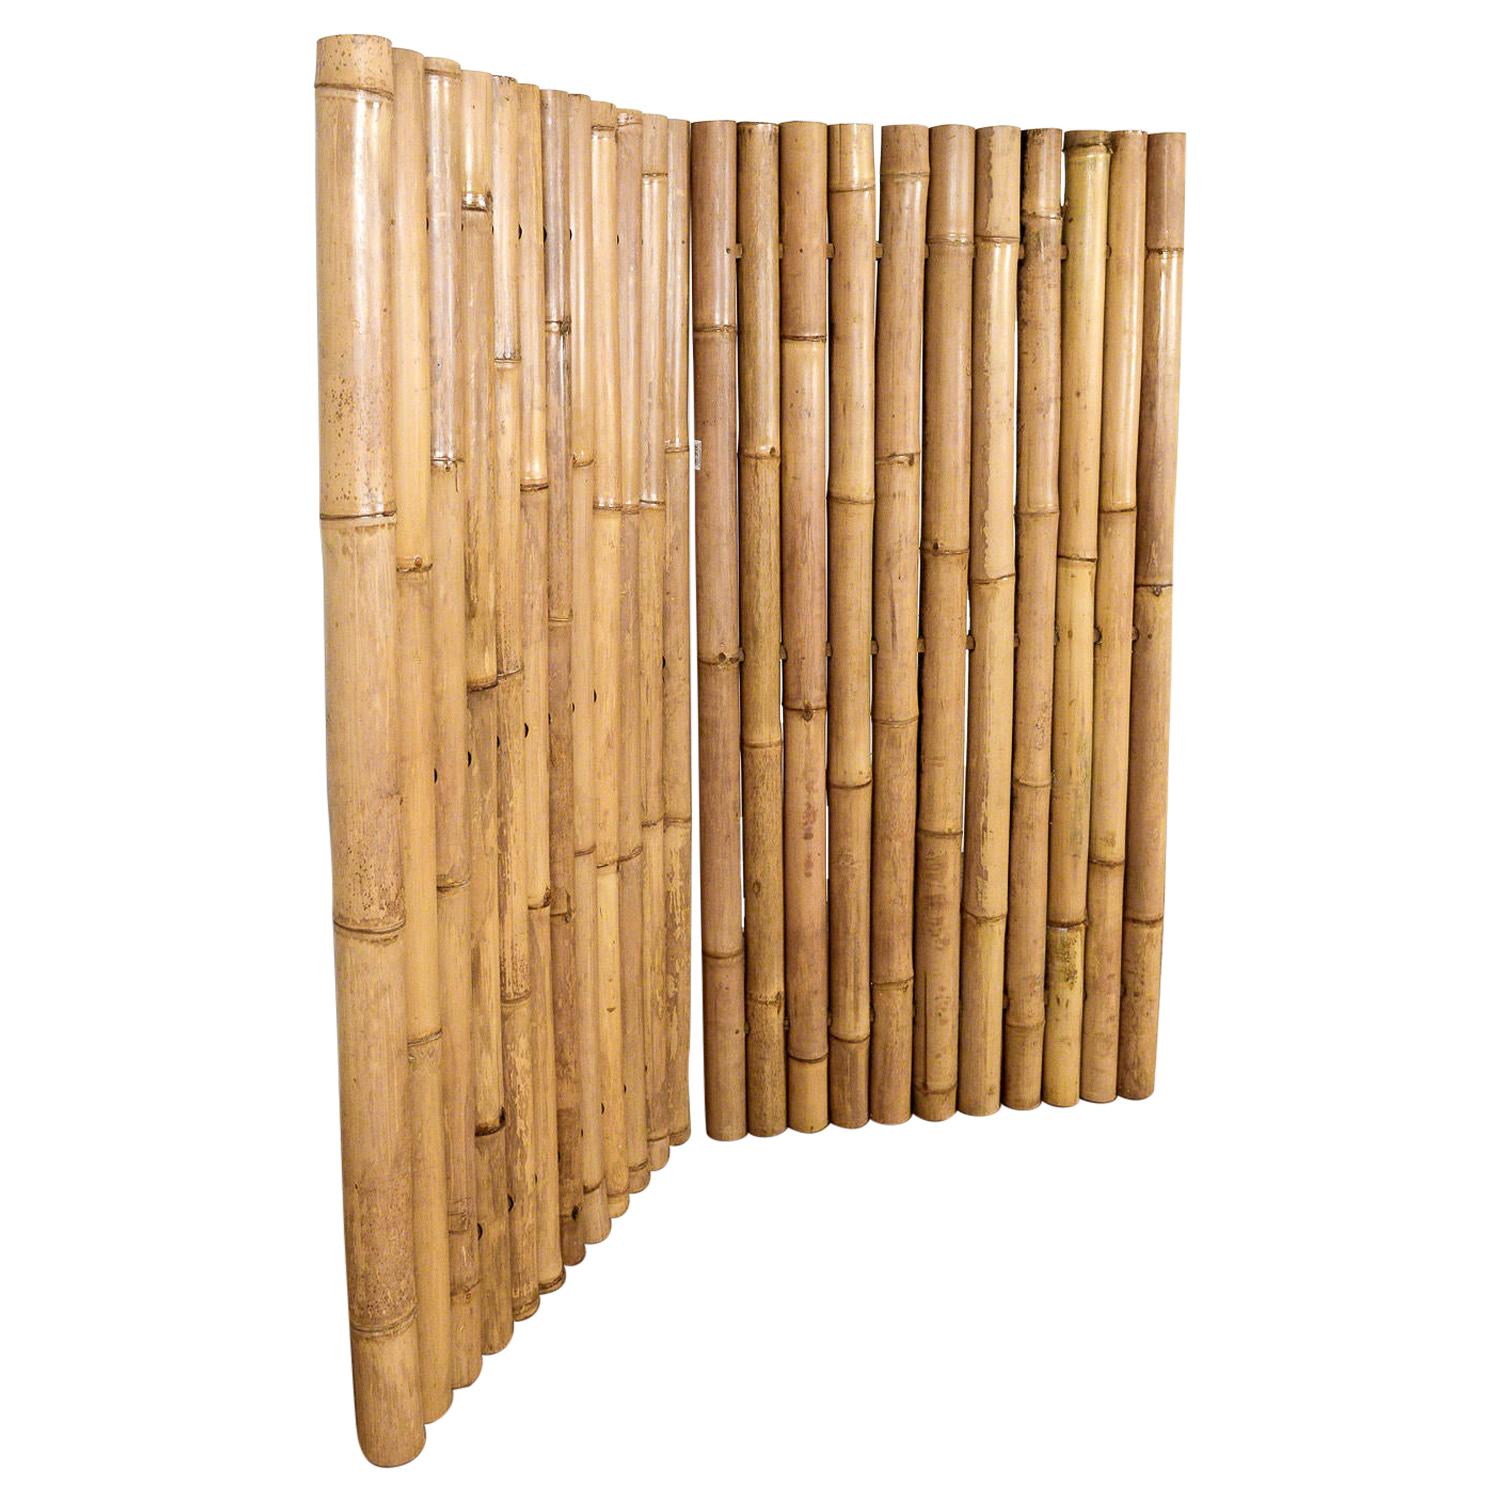 Giant Bamboo Panel / Screen / Fence, 20th Century For Sale